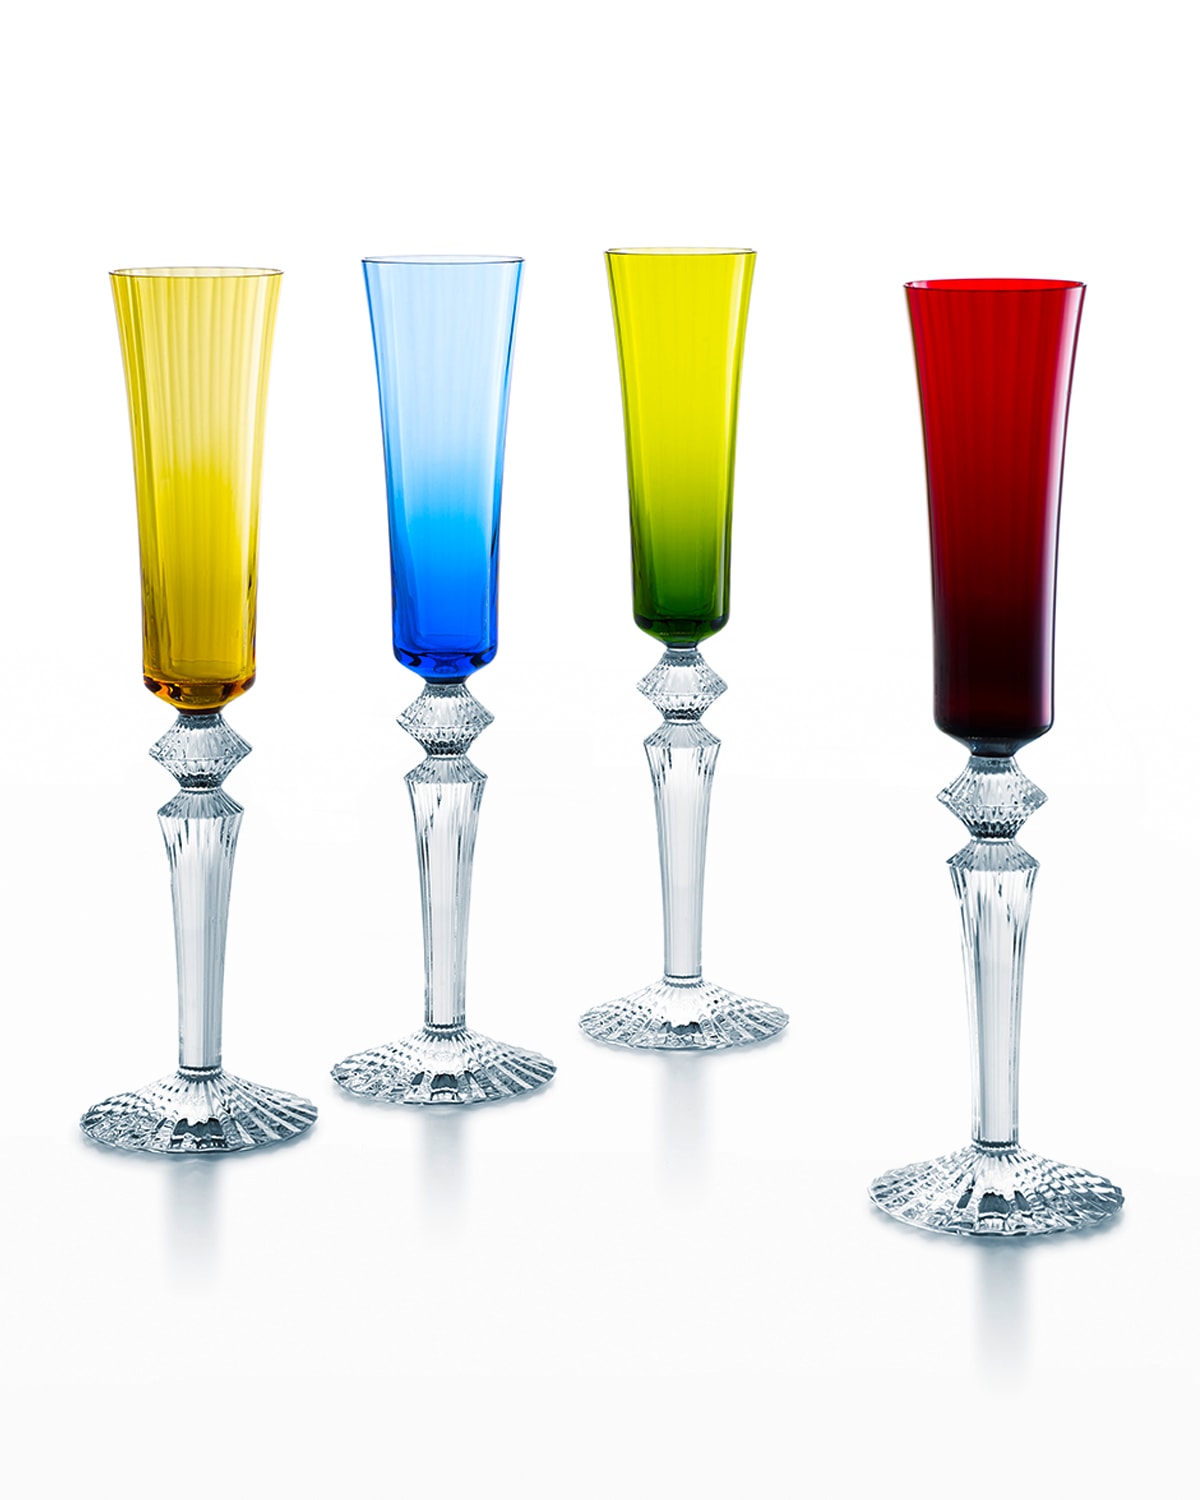 The Martha, By Baccarat Mille Nuits Flutes, 4-piece Set